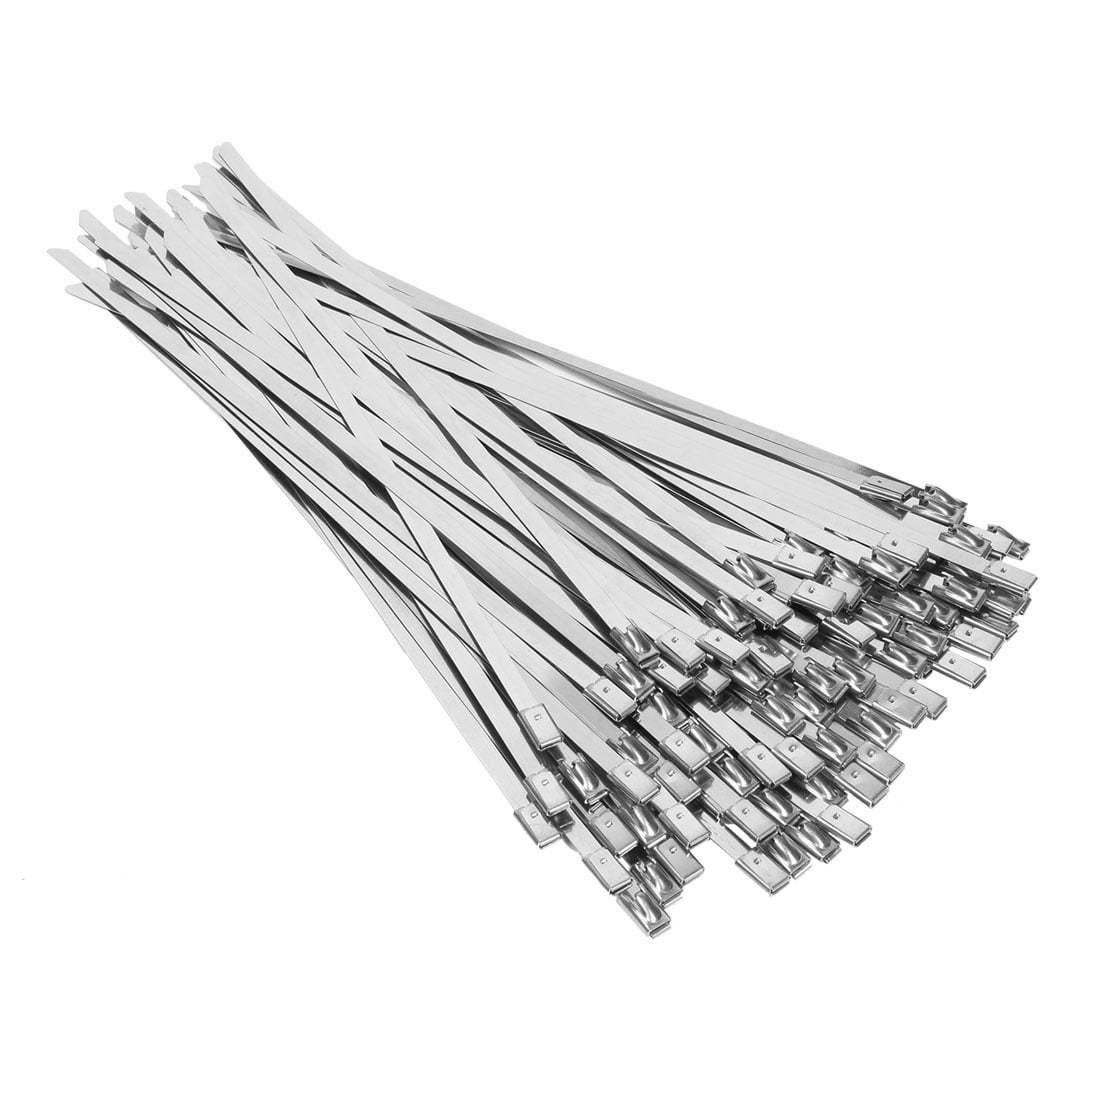 Details about   100PCS 304 STAINLESS STEEL COATED MULTI-PURPOSE LOCKING CABLE ZIP TIES ORNATE 